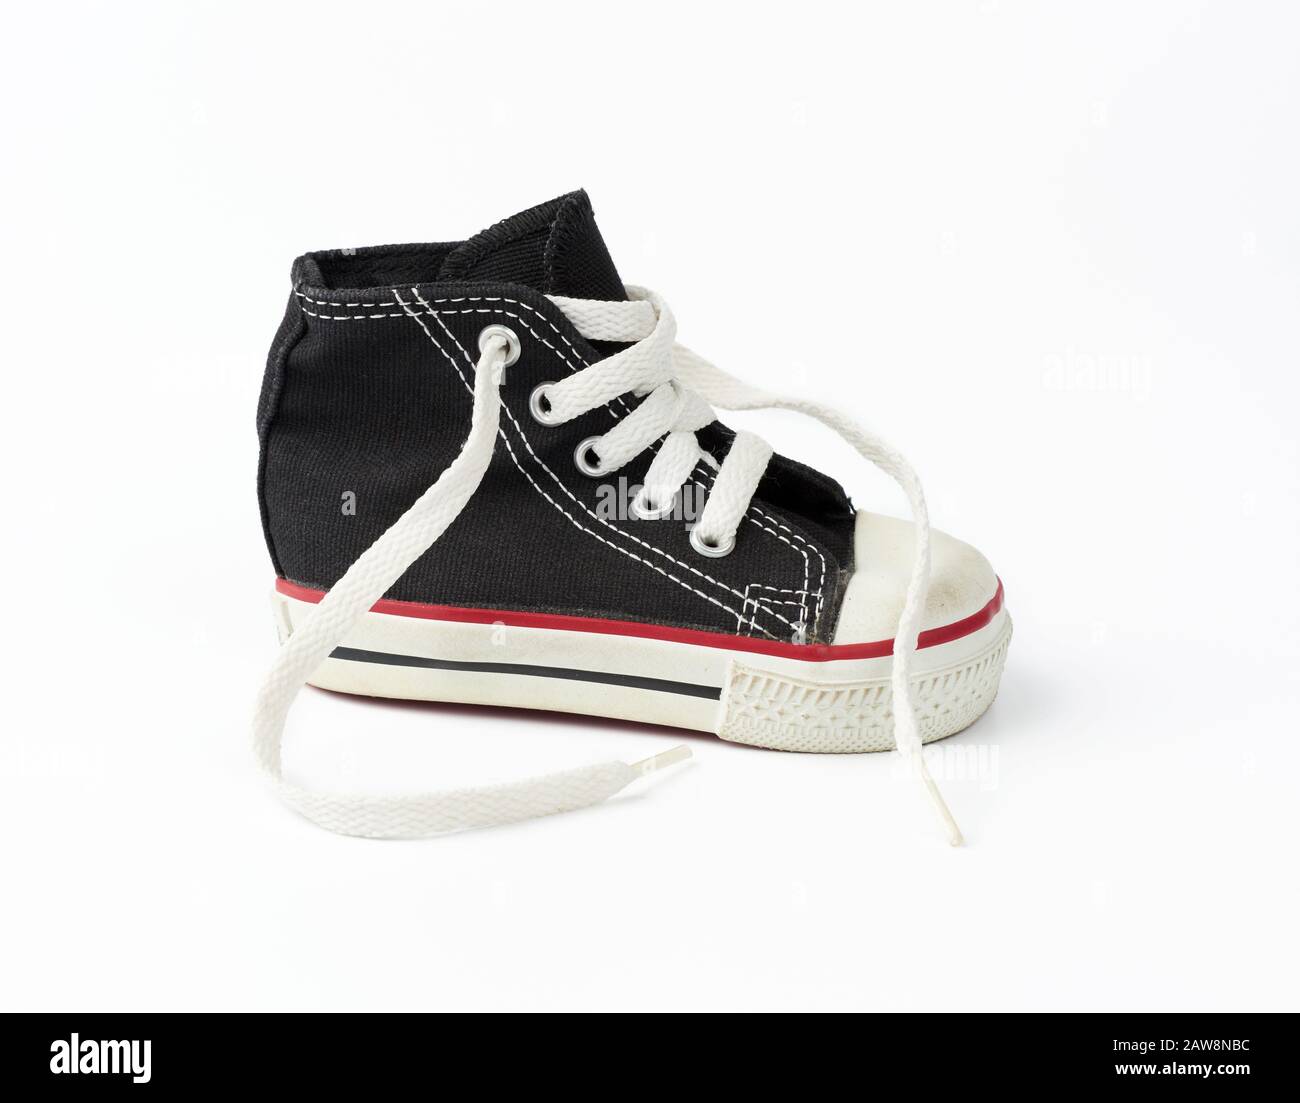 black textile children's sneaker with white untied shoelaces on a white ...